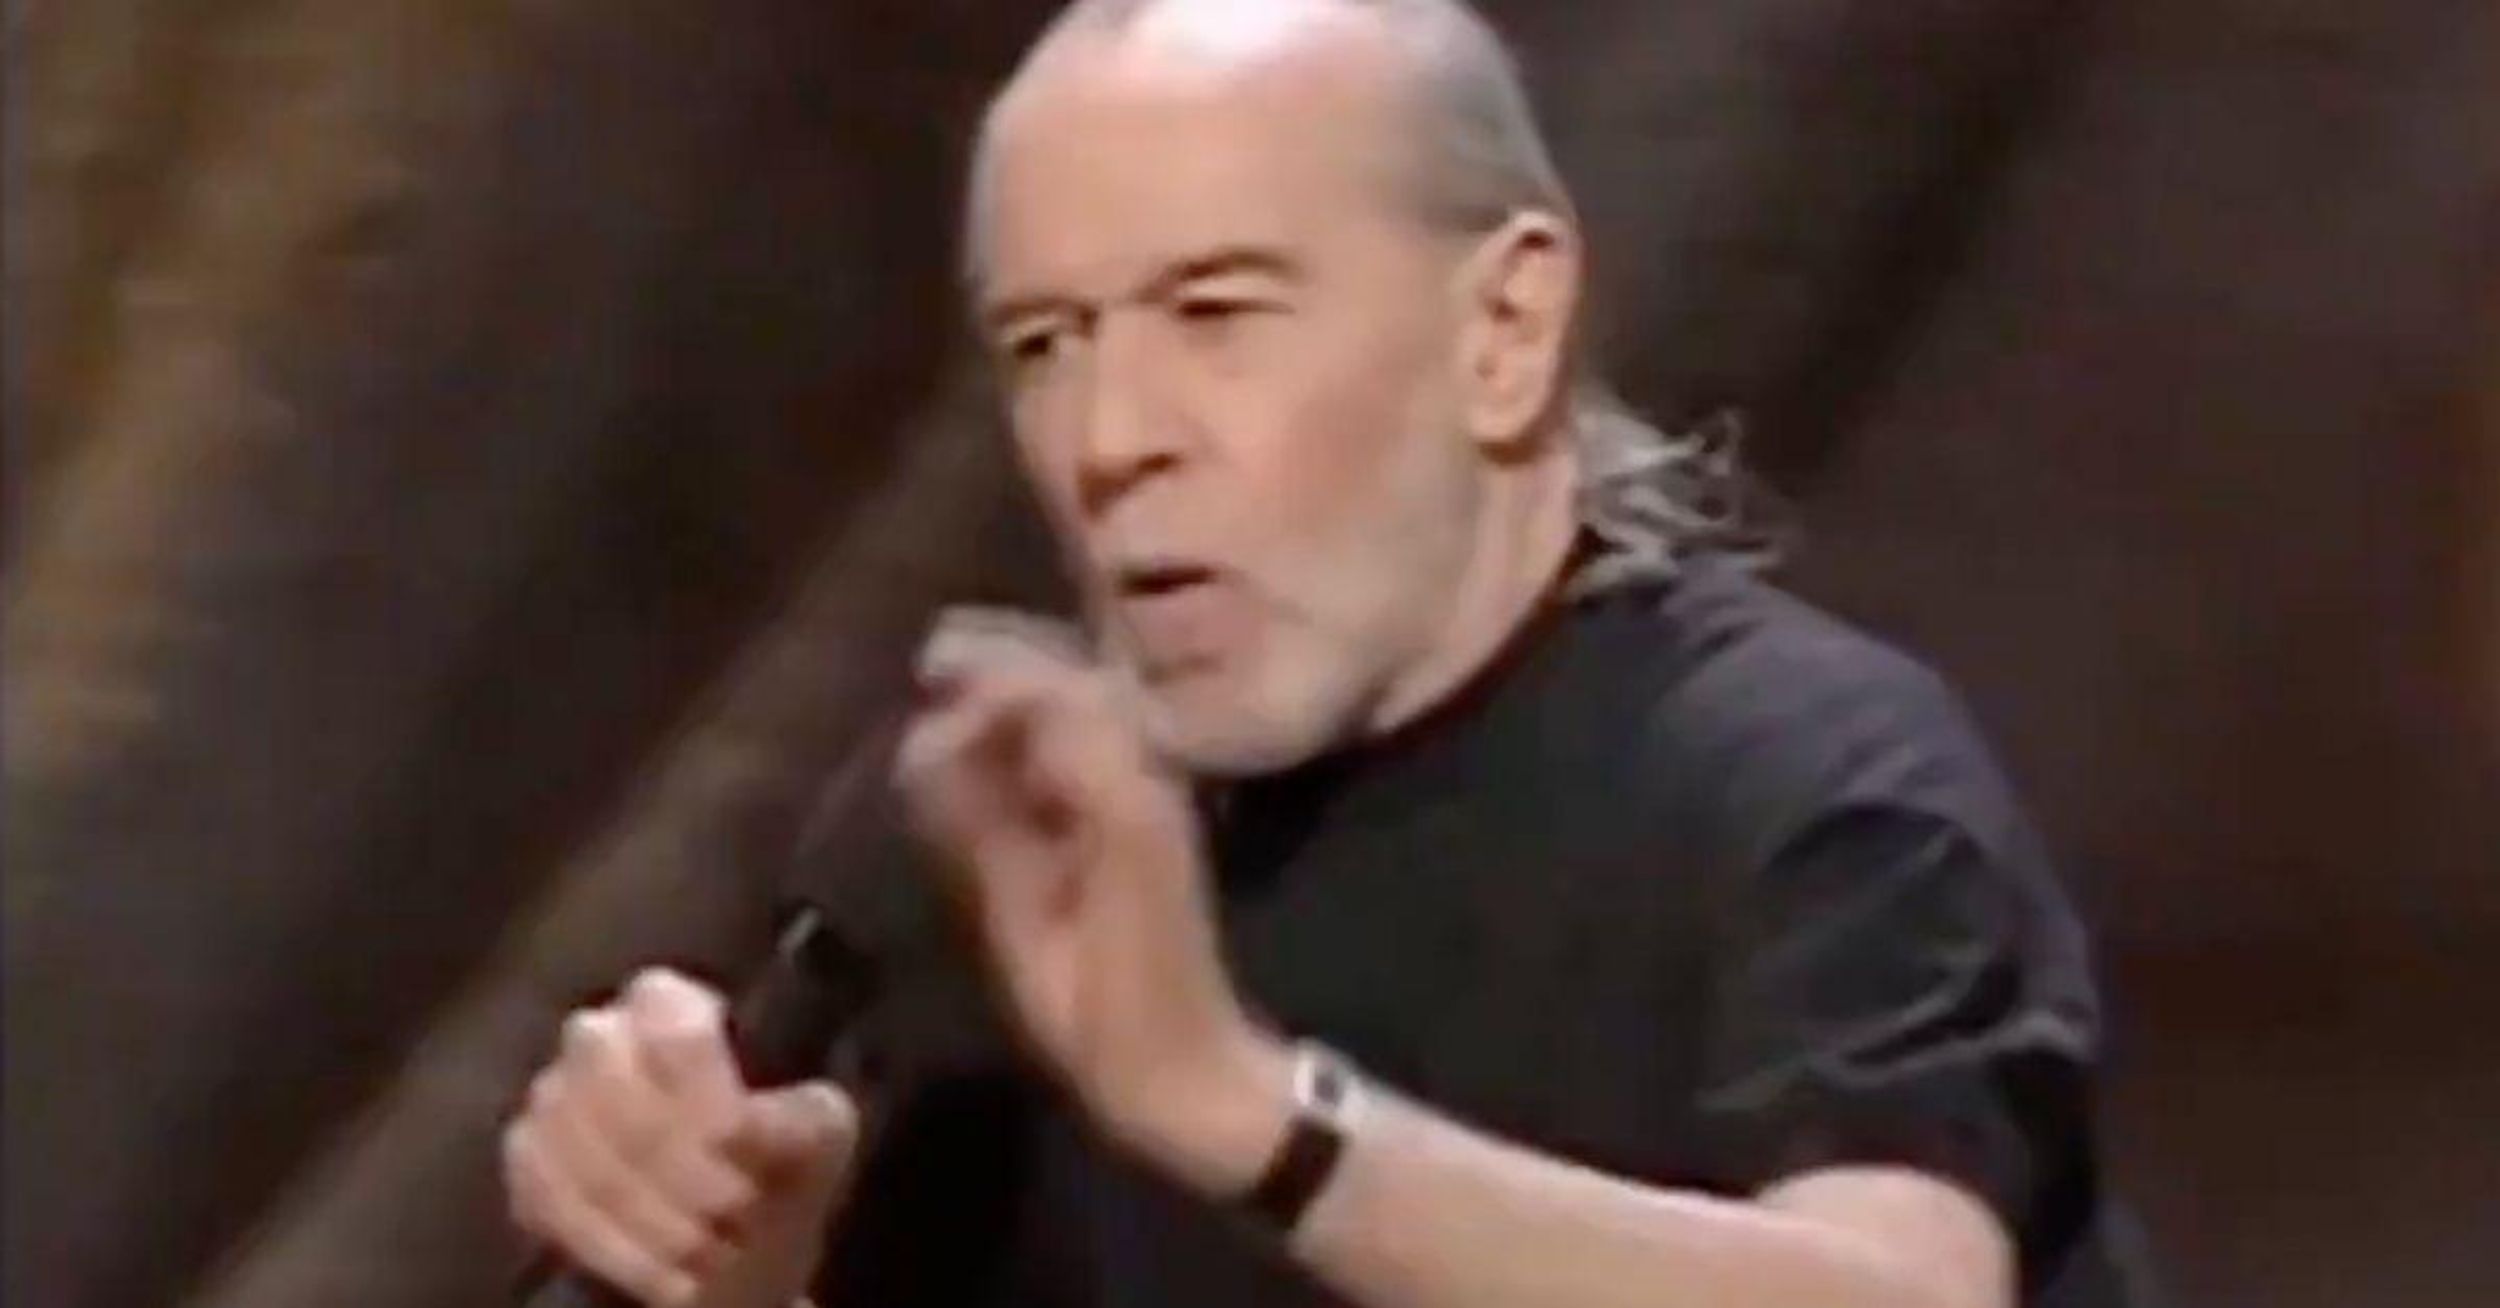 Resurfaced Clip Of George Carlin Calling Out Hypocrisy Of People Who Claim To Be 'Pro-Life' Goes Viral